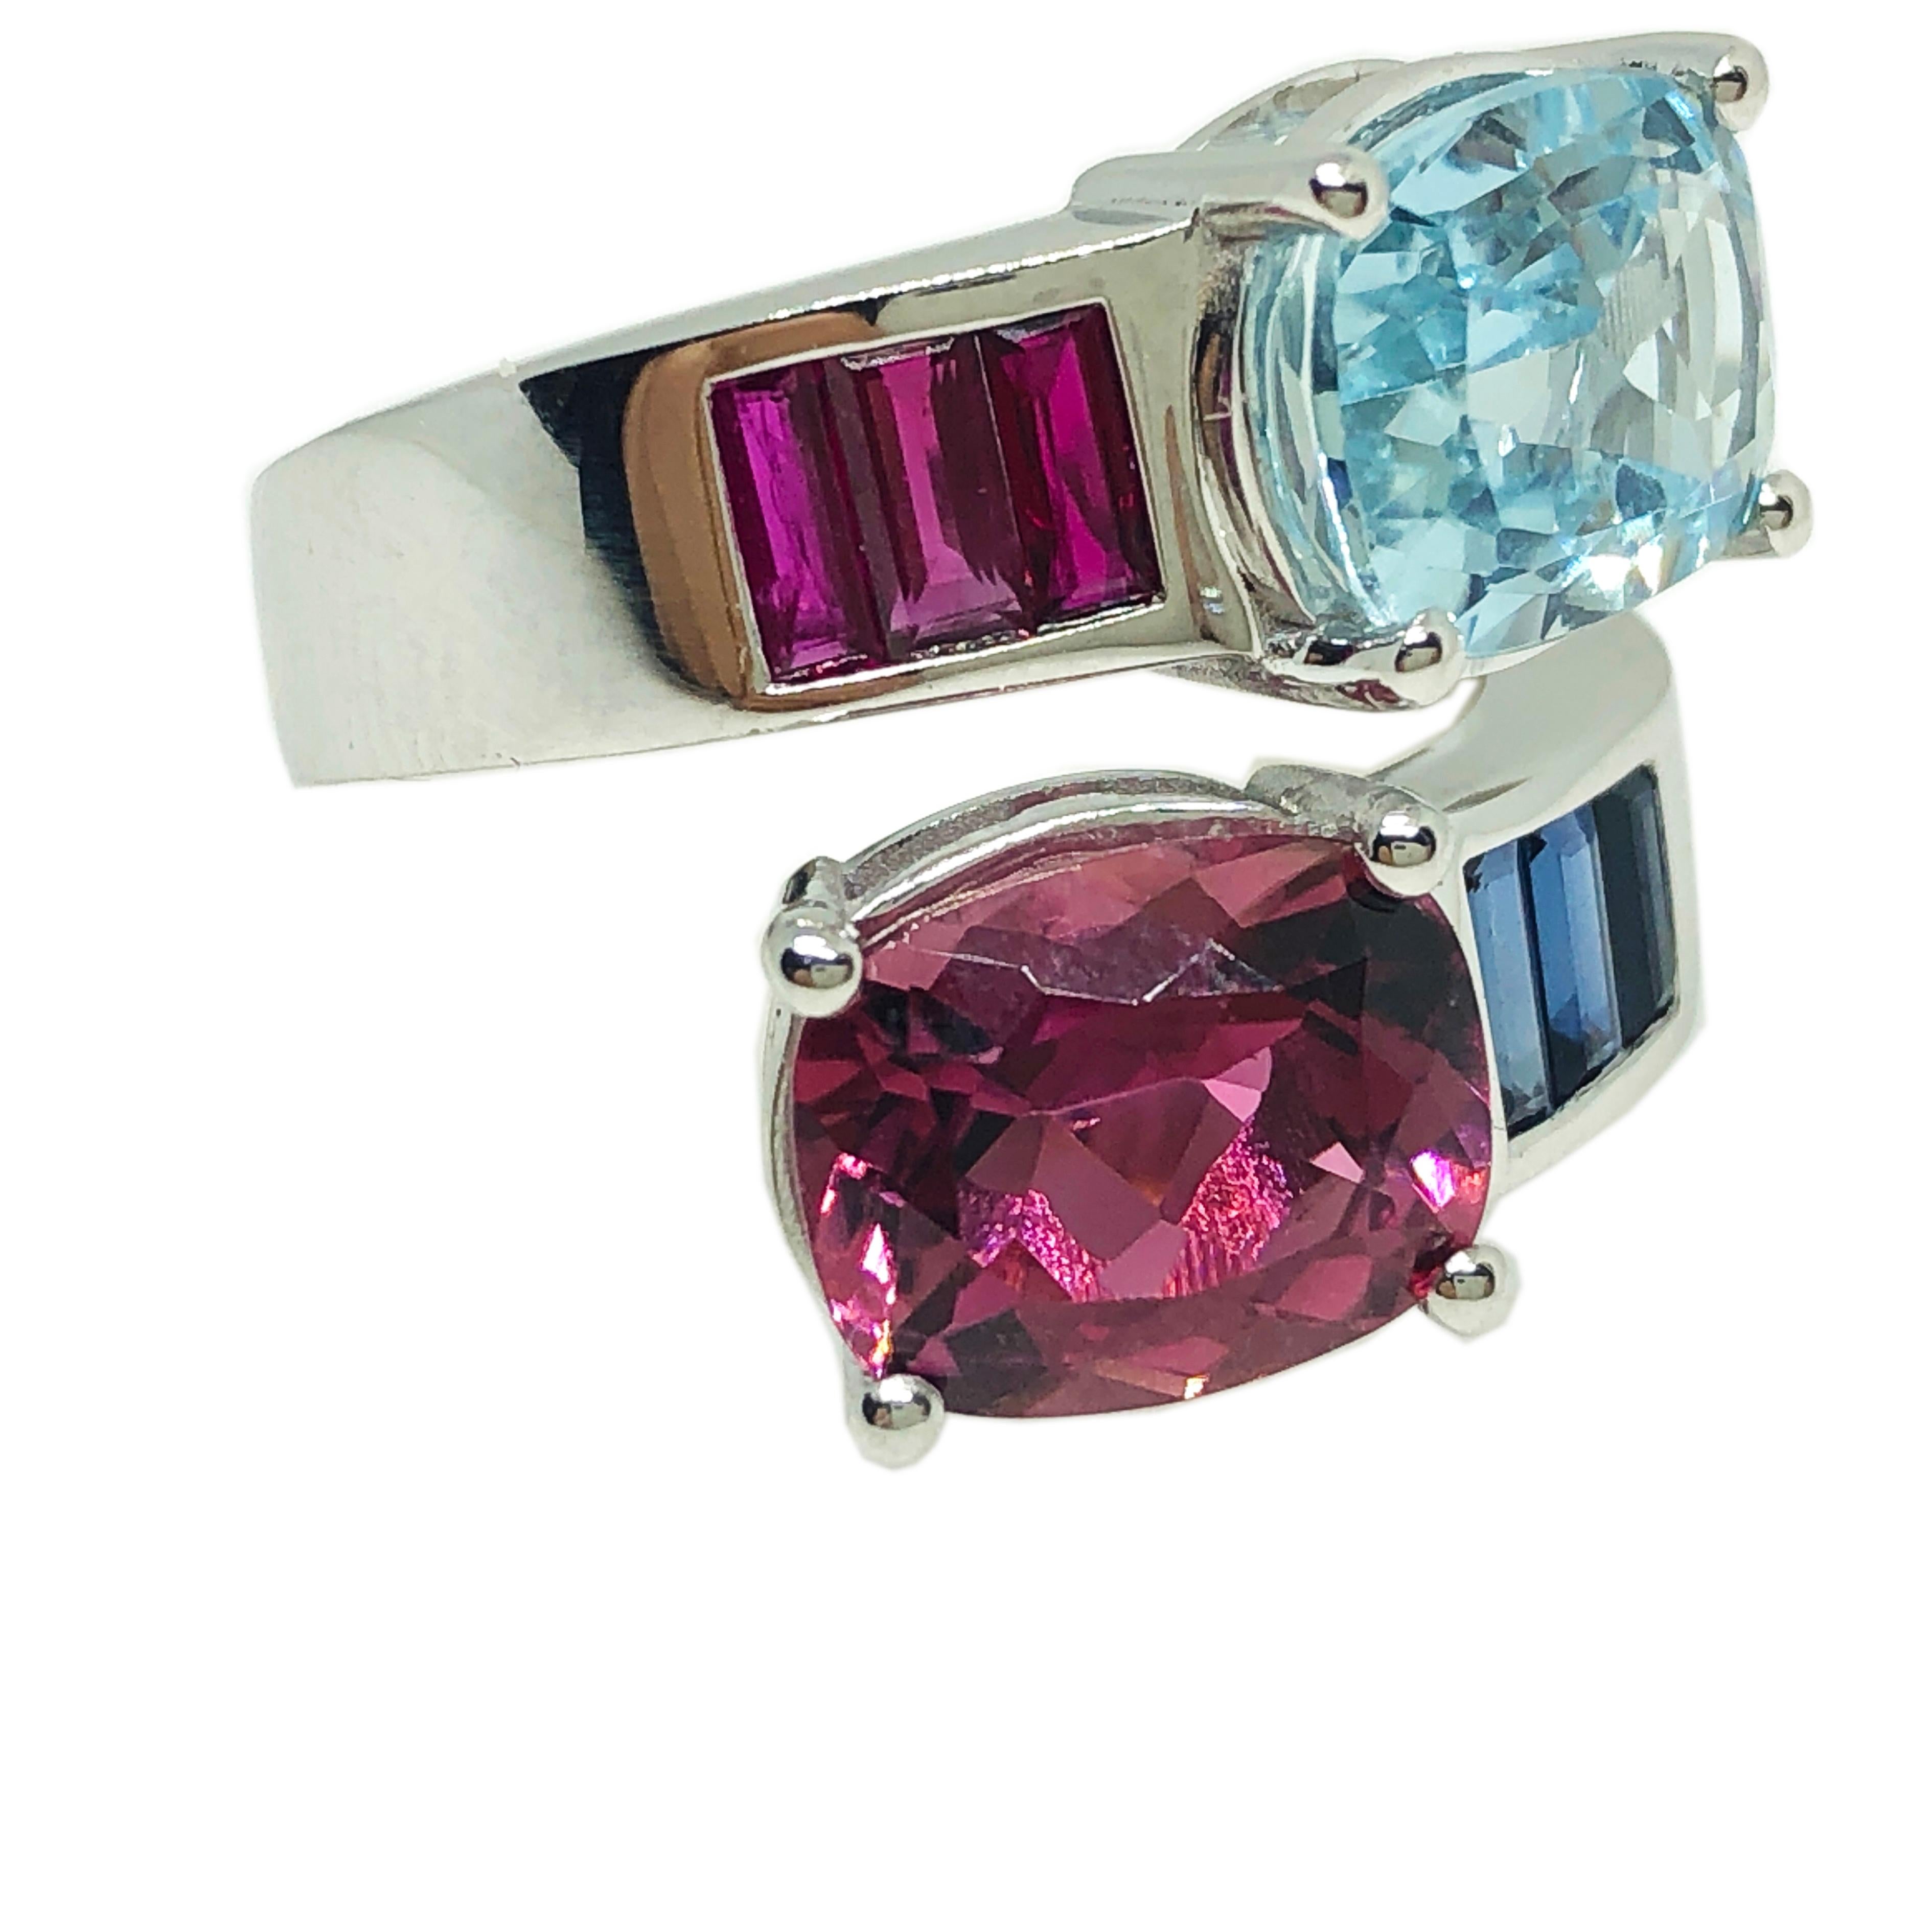 One-of-a-kind Toi et Moi Contemporary Cocktail Ring featuring 2.57 Carat  Aquamarine  and 2.80 Carat Pink Tourmaline  Antik Cushion Cut in a sumptuous 0.59 Natural Sapphire Baguette and 0.58 natural Ruby Baguette White Gold Setting. In our fitted